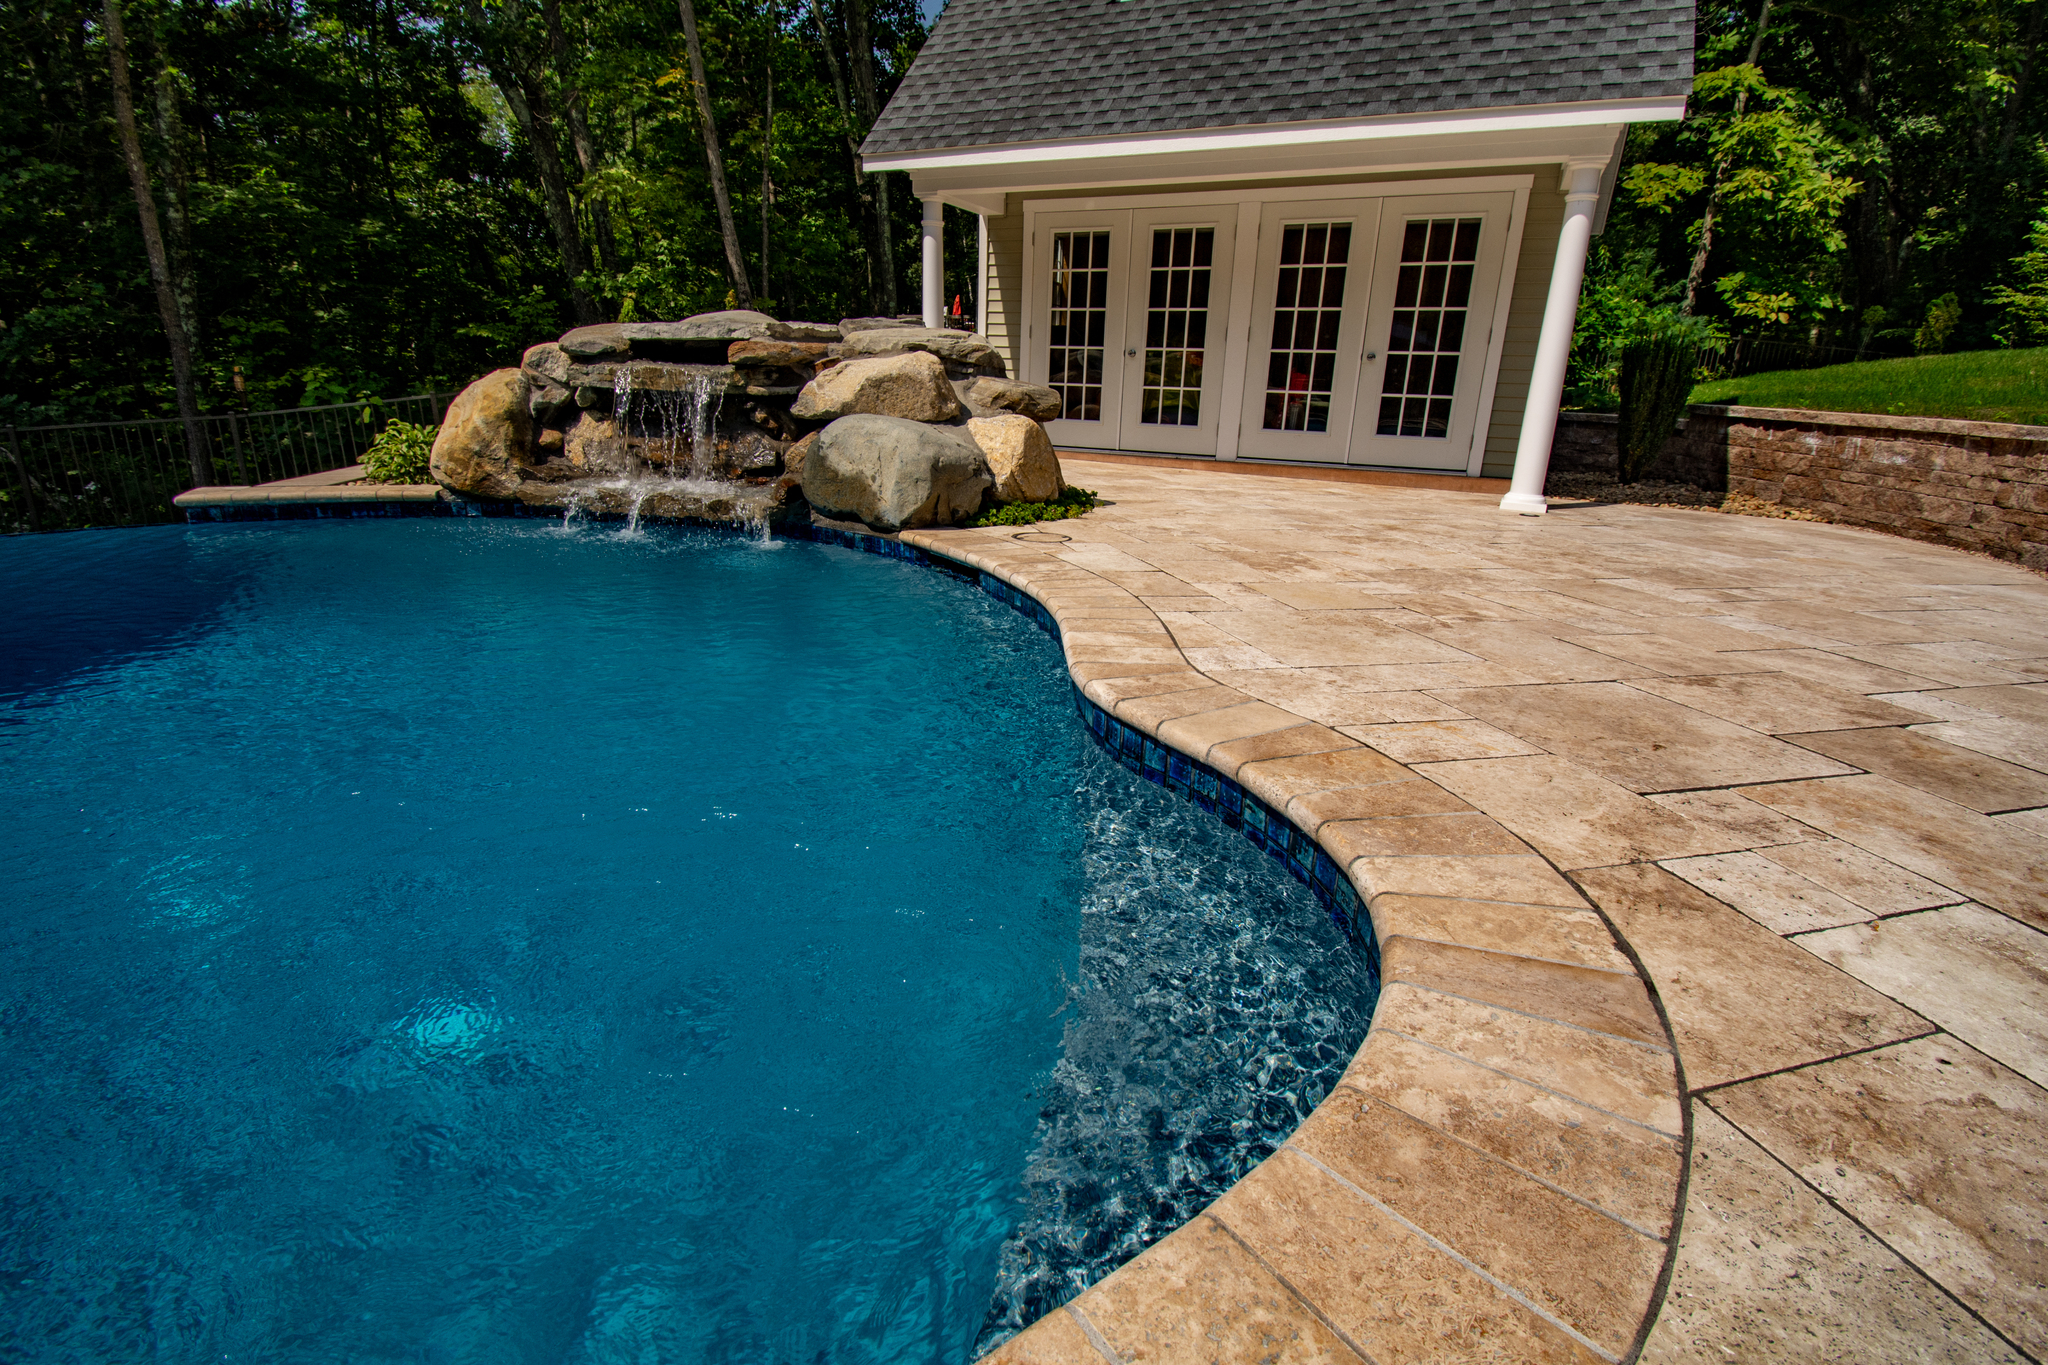 Pool Coping Tile Triad Associates, Can Any Tile Be Used In A Pool